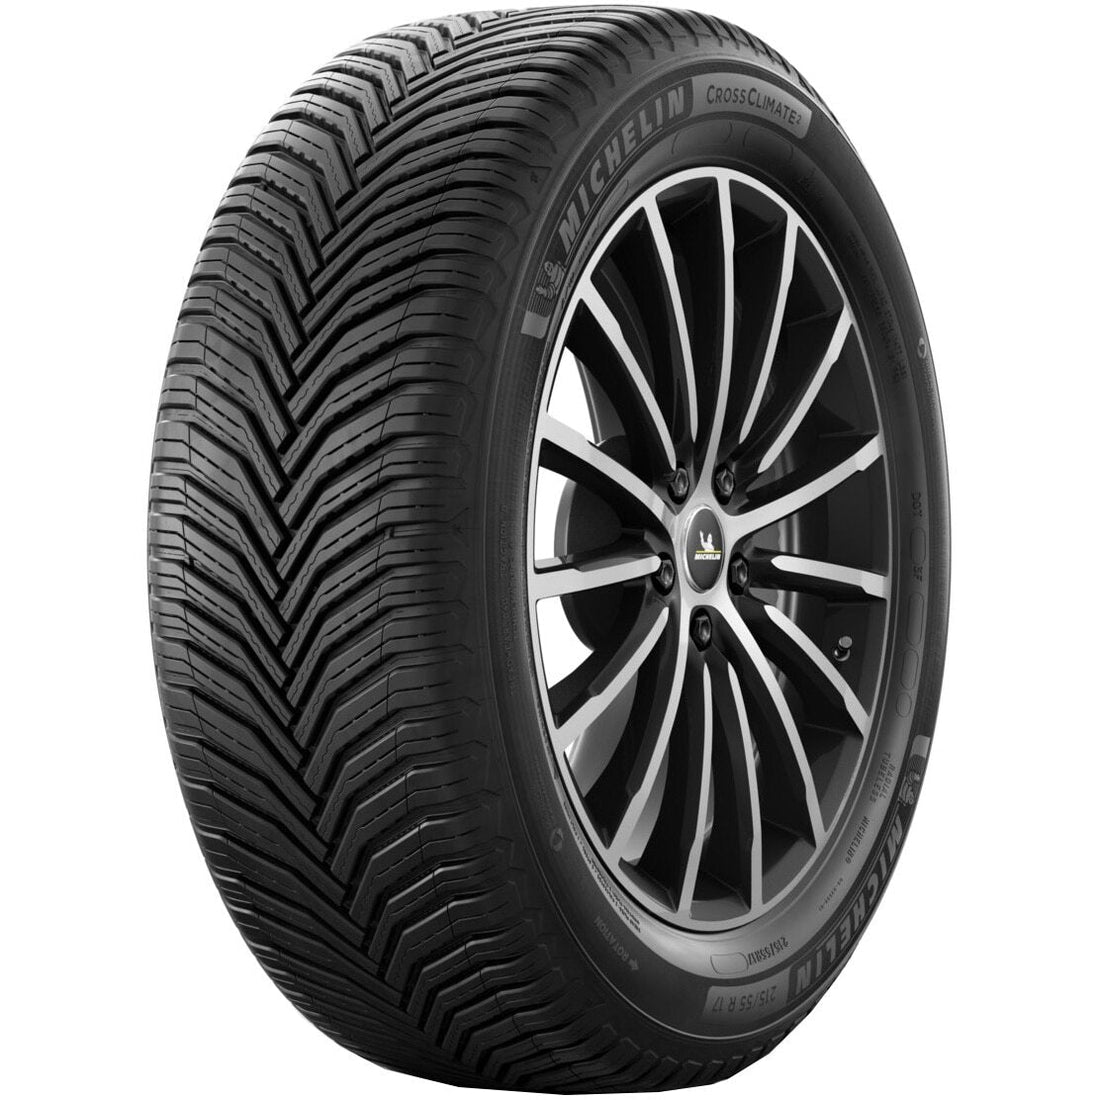 Anvelope All-season Michelin Crossclimate 2 suv xl 255/60R18 112=1120kgV=240 km/h Anvelux